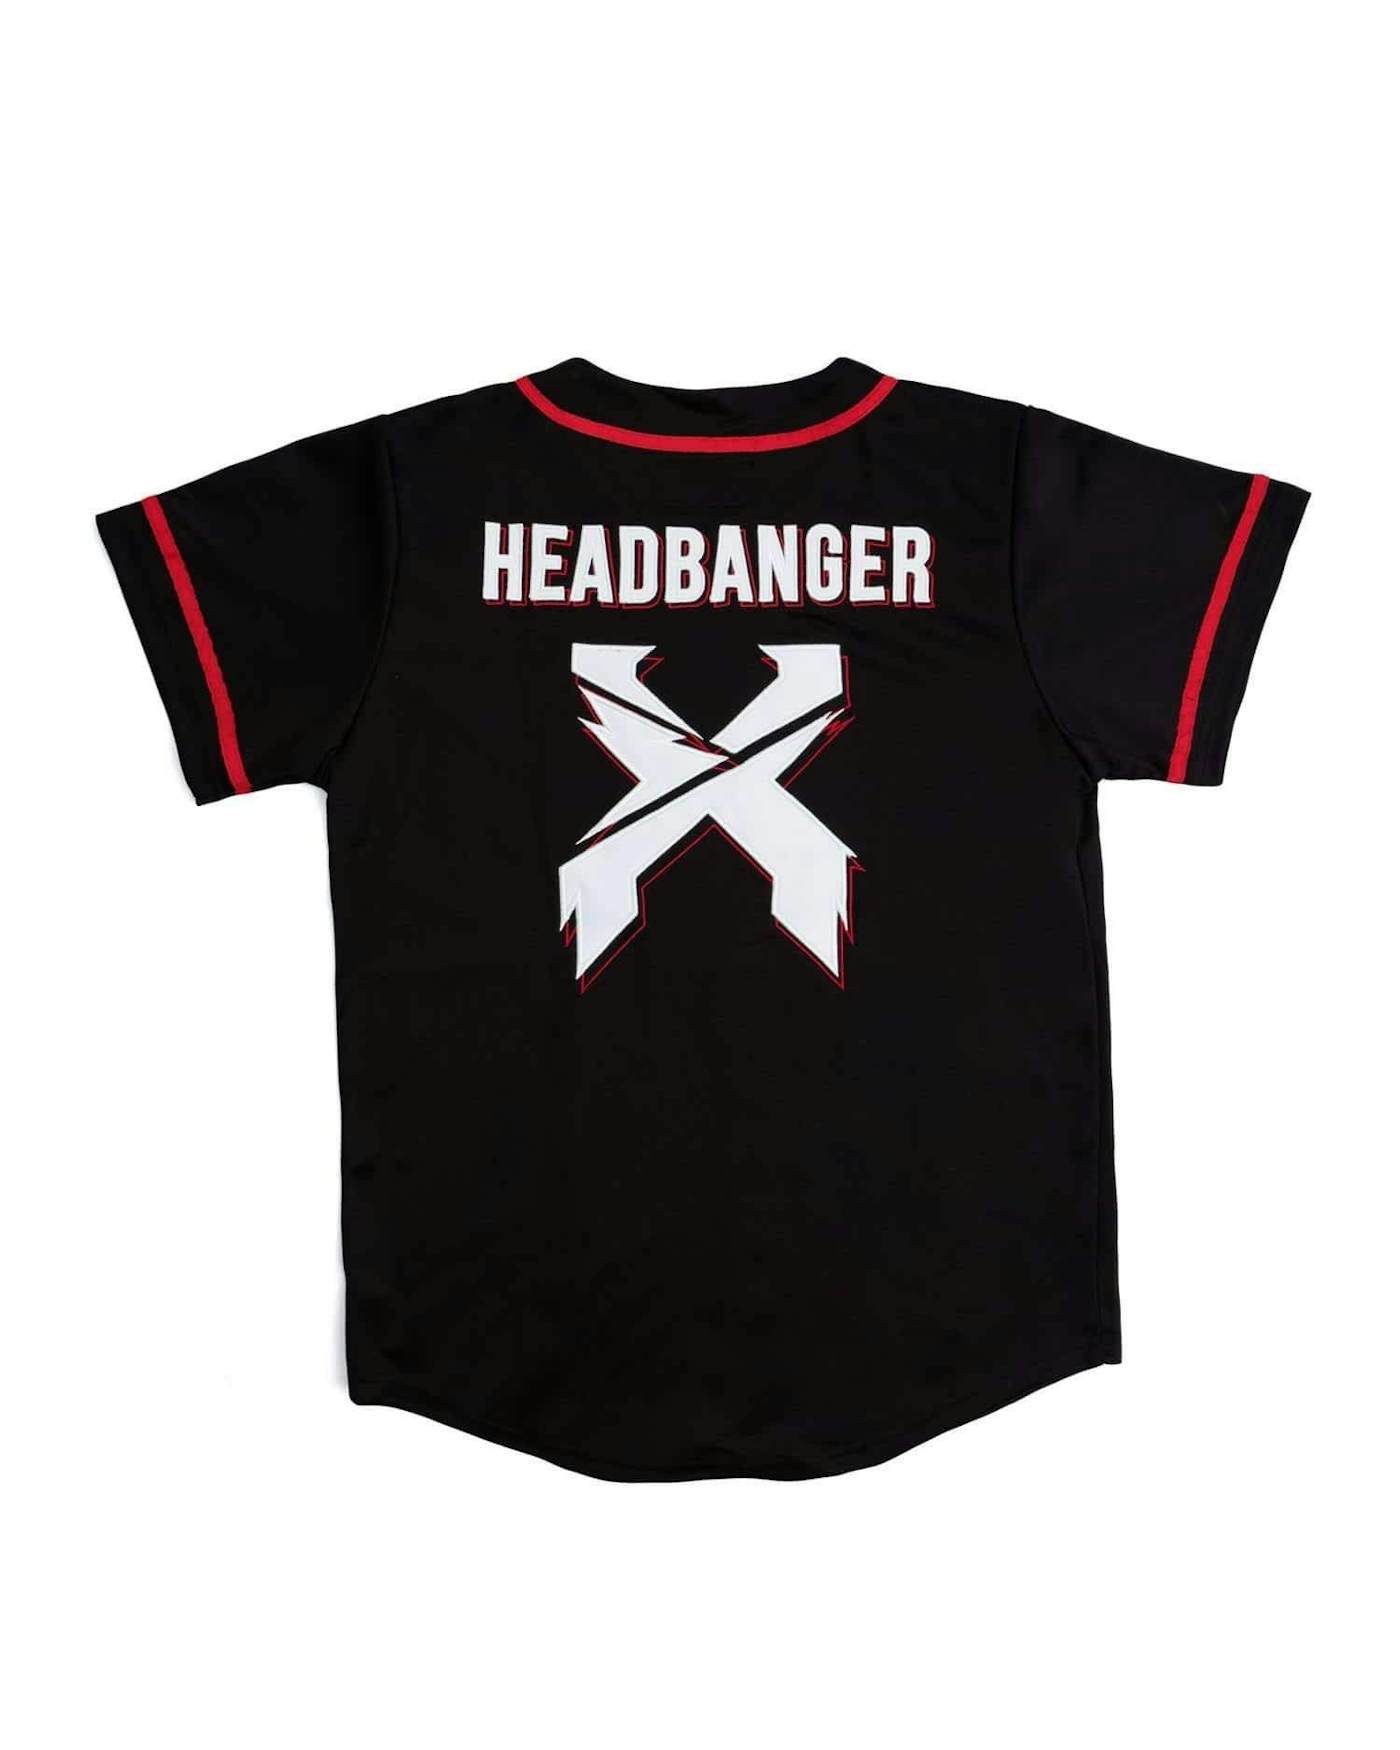 EXCISION HEADBANGER Embroidered Baseball Jersey - Size Small Black